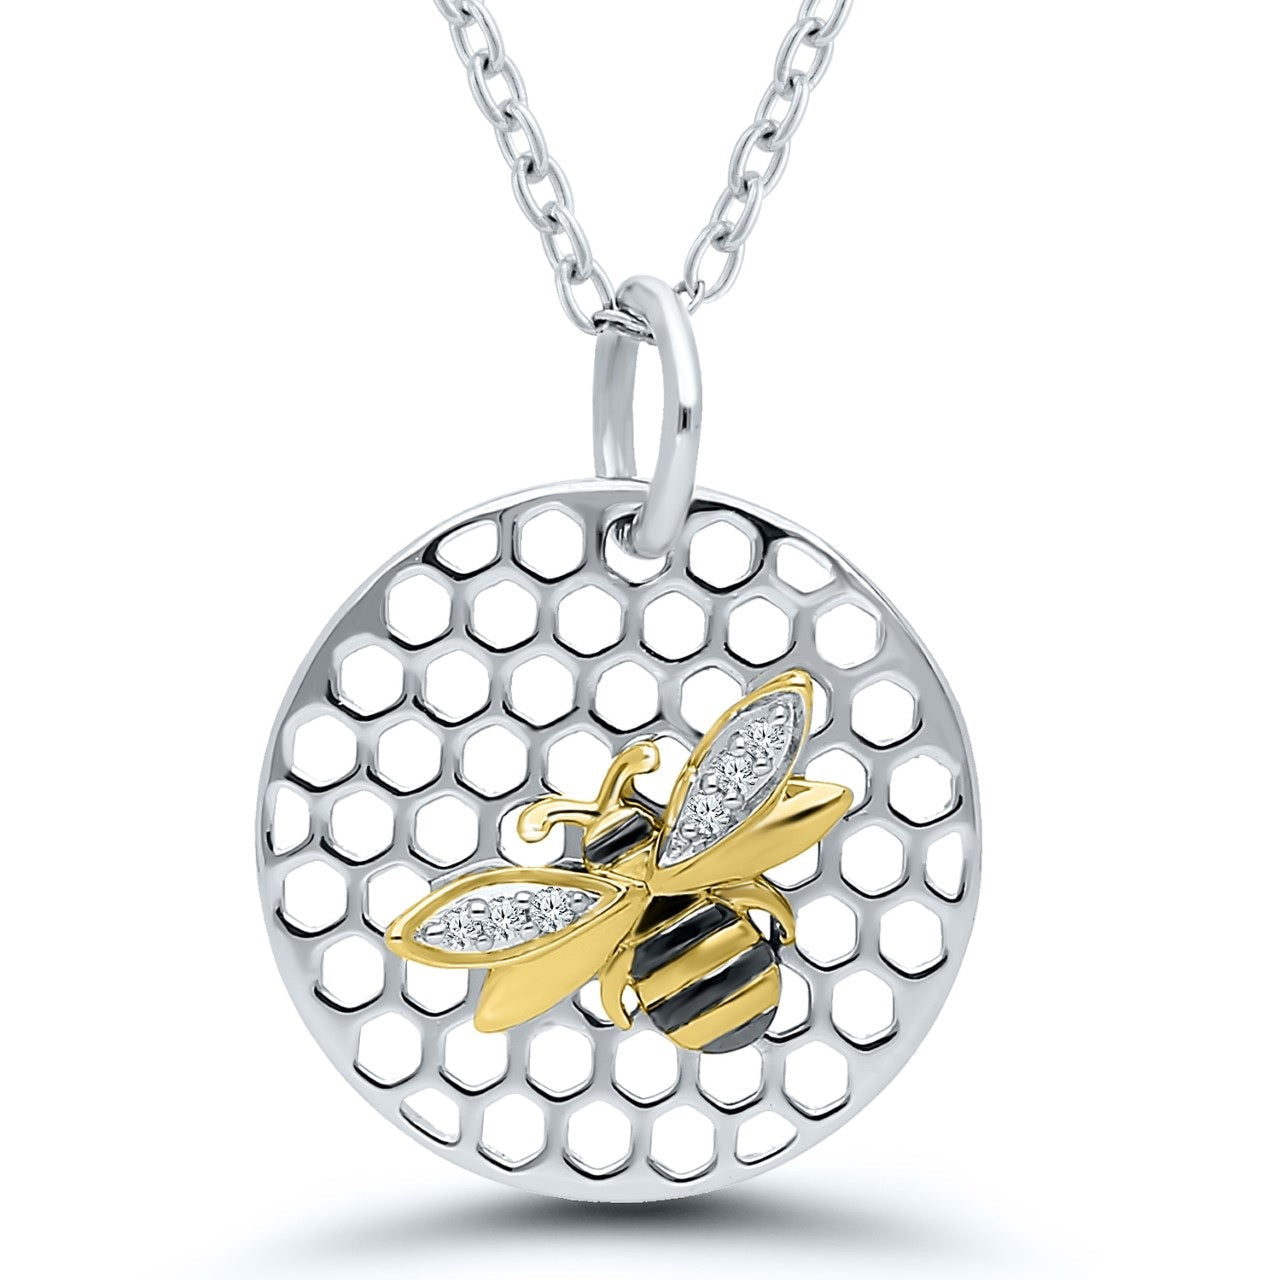 DEROPLK Project Honey Bees - Adopt a Bee Necklace 925 Sterling Silver Bee  Inspired Silver & Gold Bumblebee Necklace Jewelry Gift for Women Girl :  Amazon.co.uk: Fashion